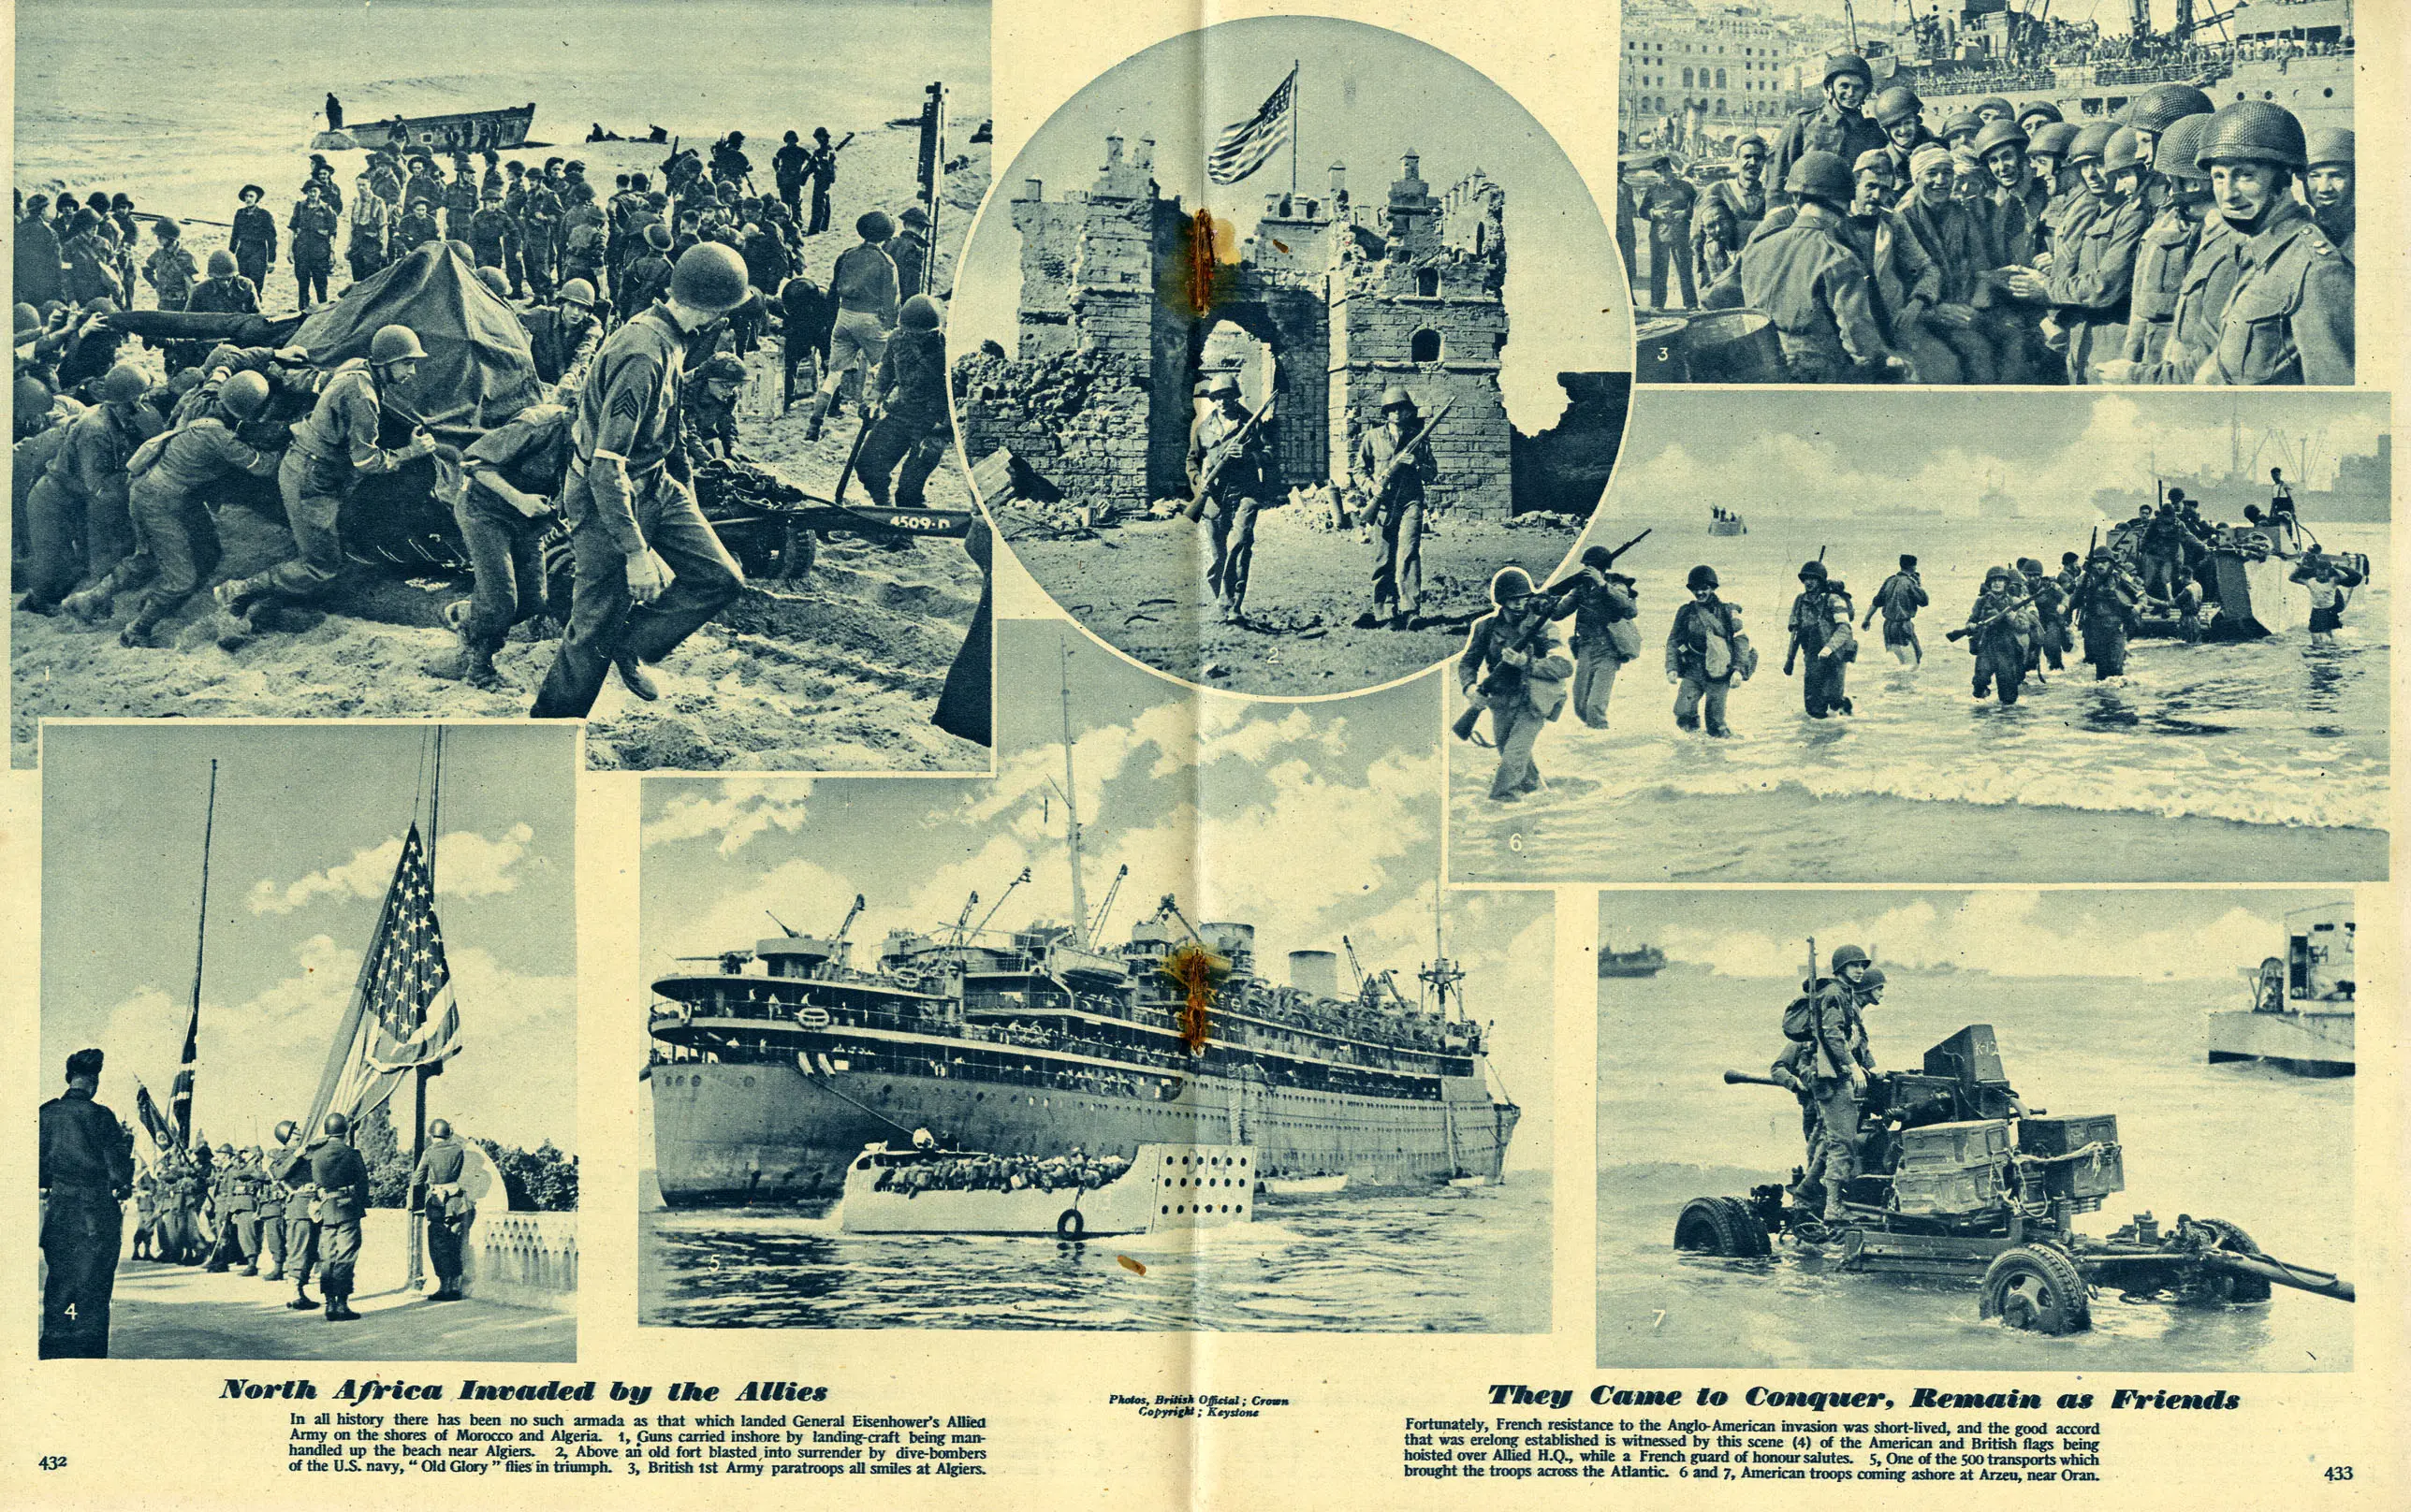 A page of The War Illustrated showing several photos of American soldiers in North Africa.